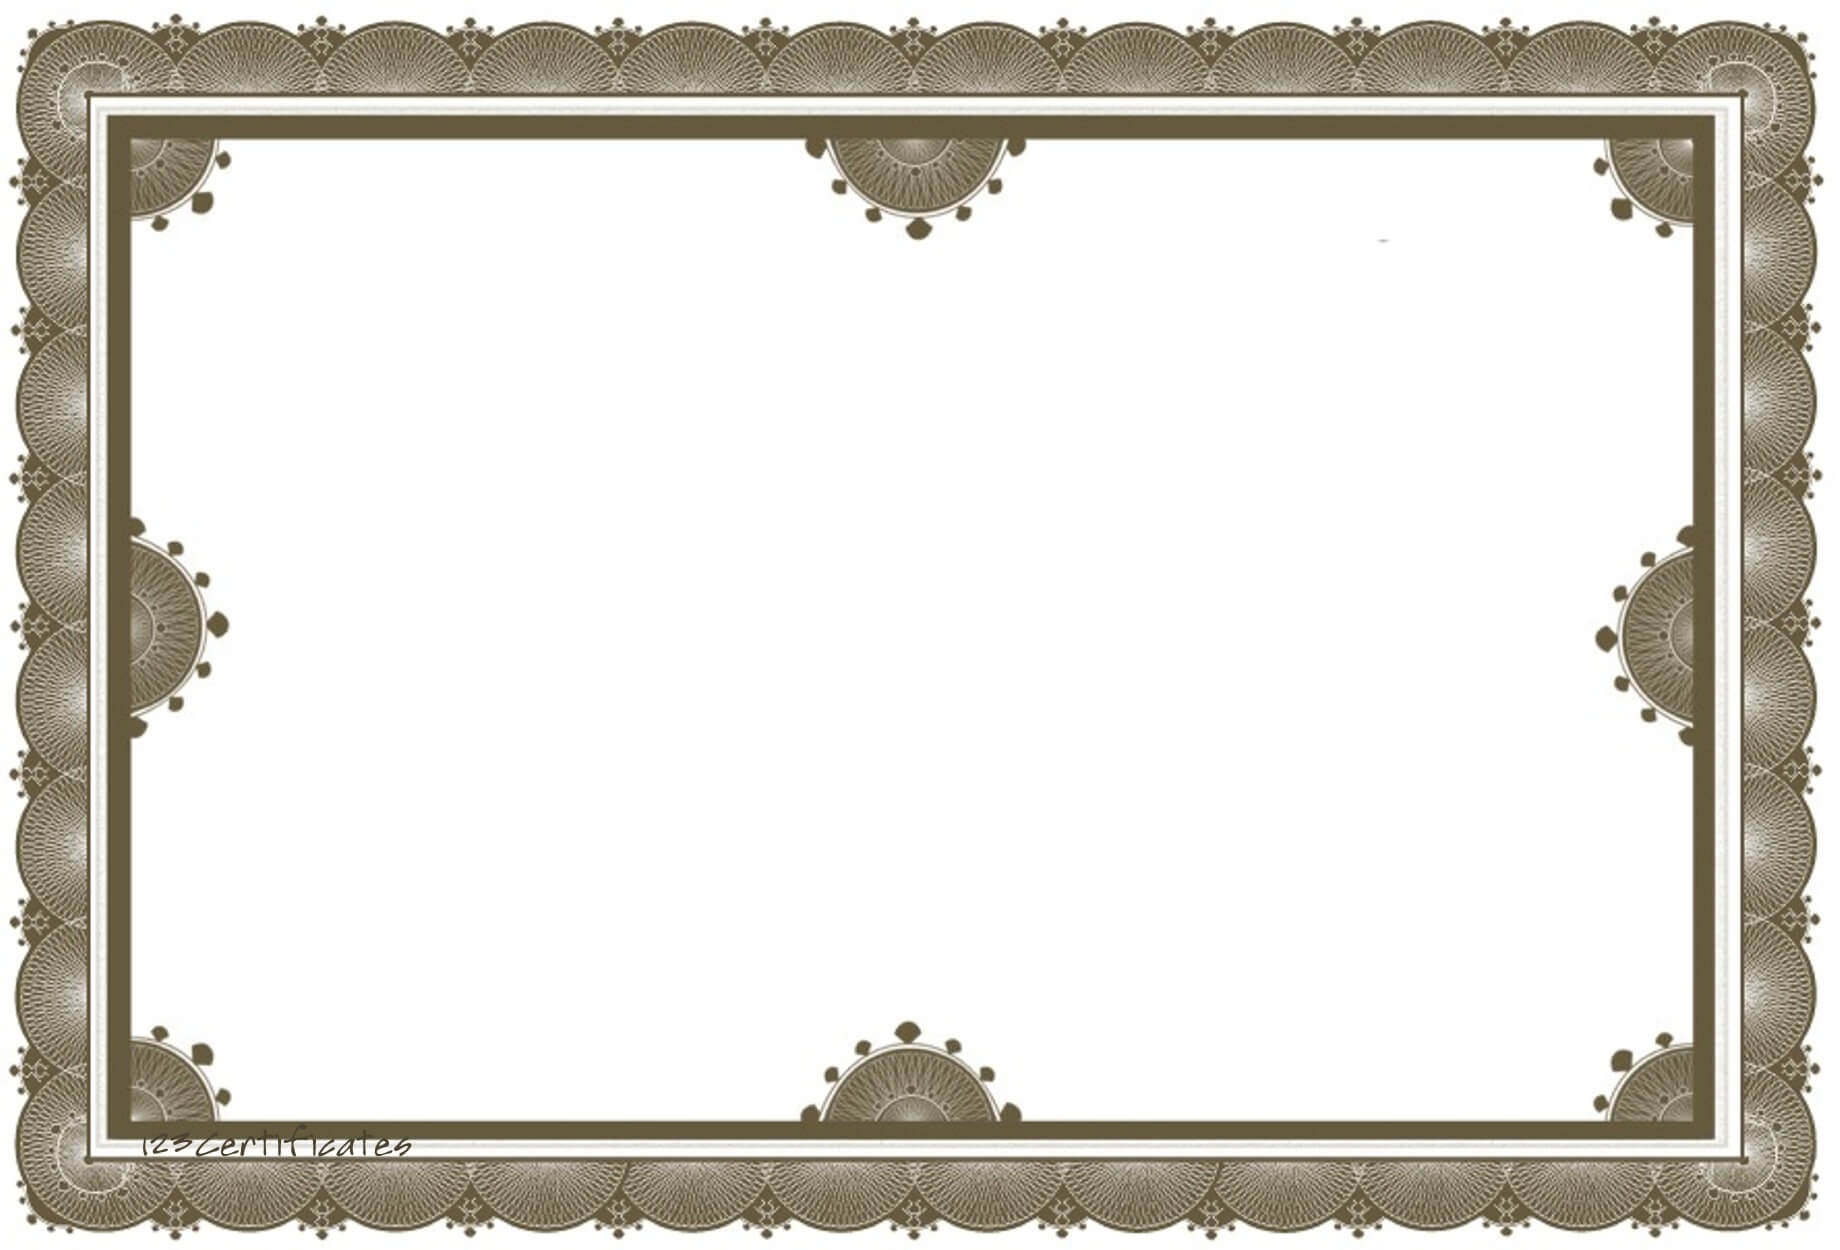 Free Certificate Borders To Download, Certificate Templates Inside Landscape Certificate Templates